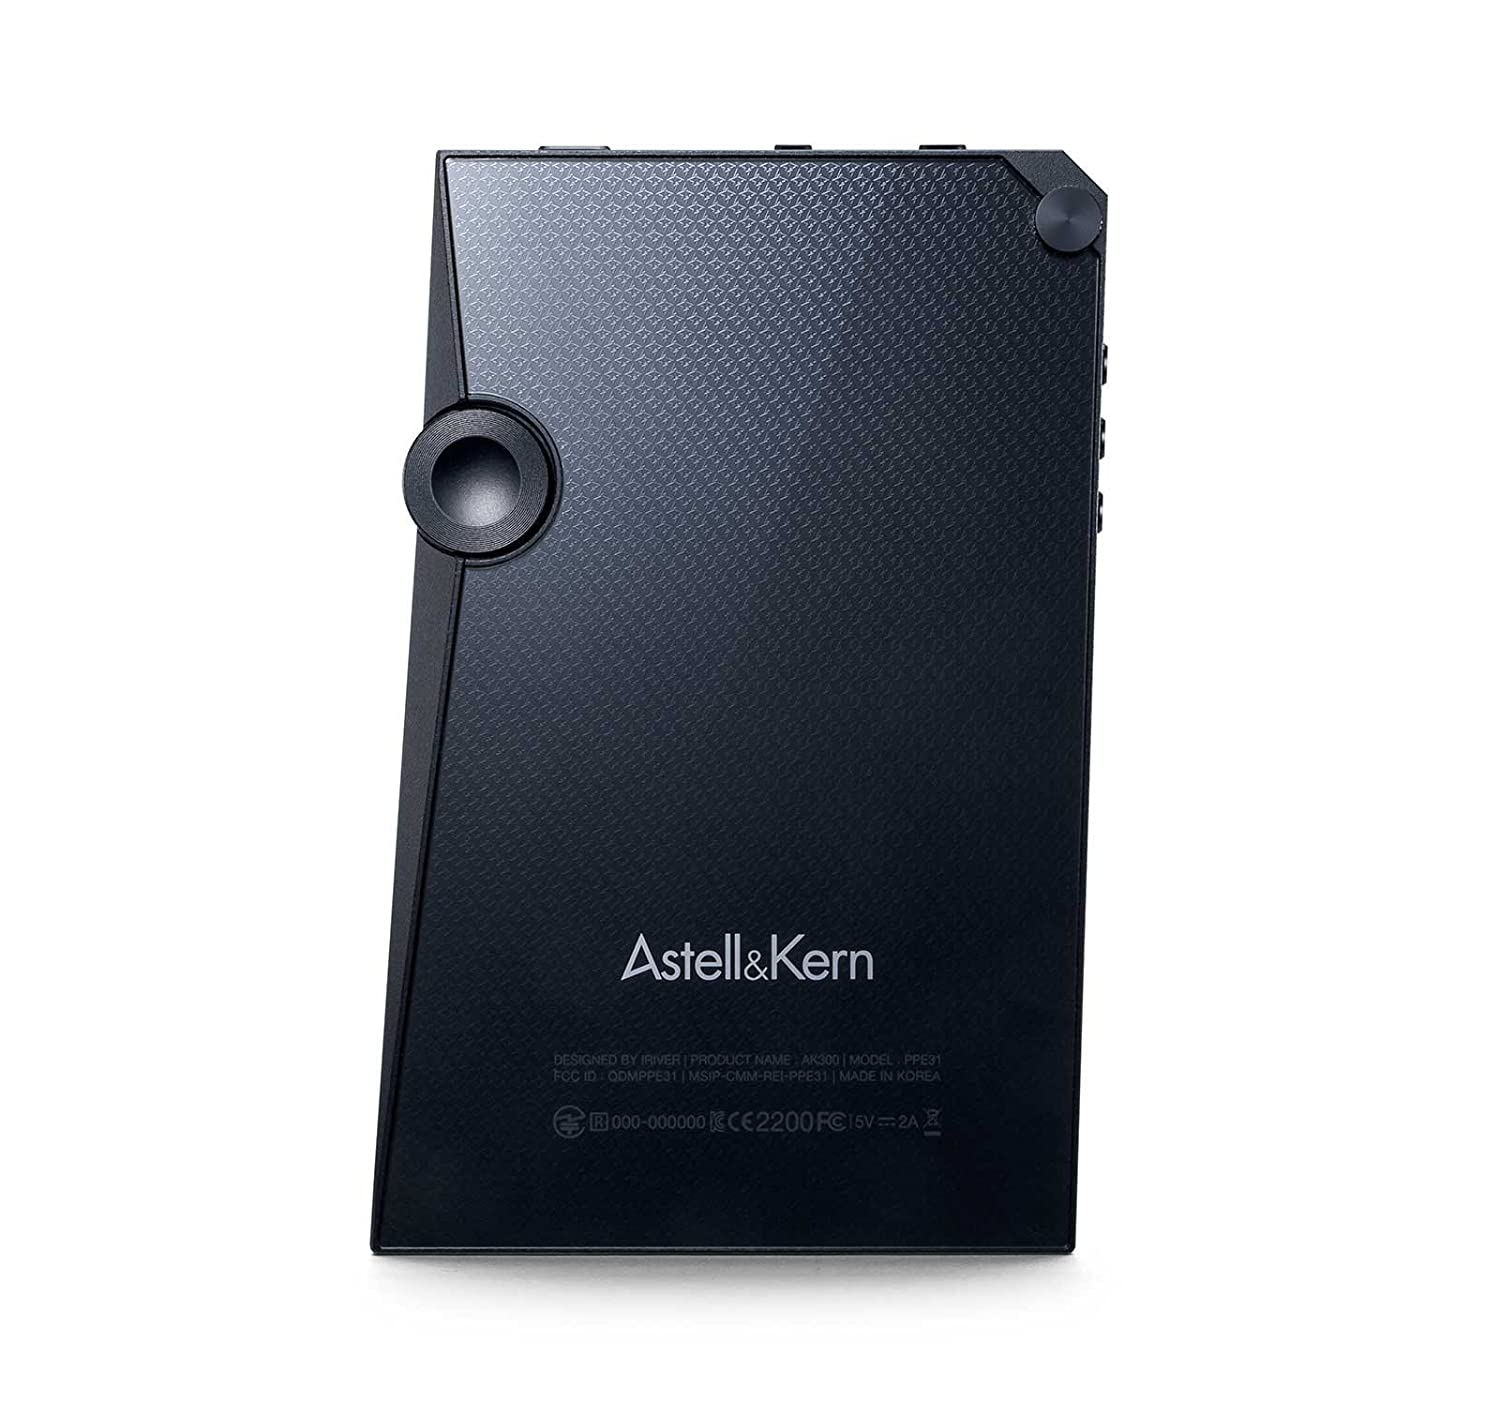 Astell & Kern AK300 High-resolution Mastering Quality Sound Portable System - image 2 of 5